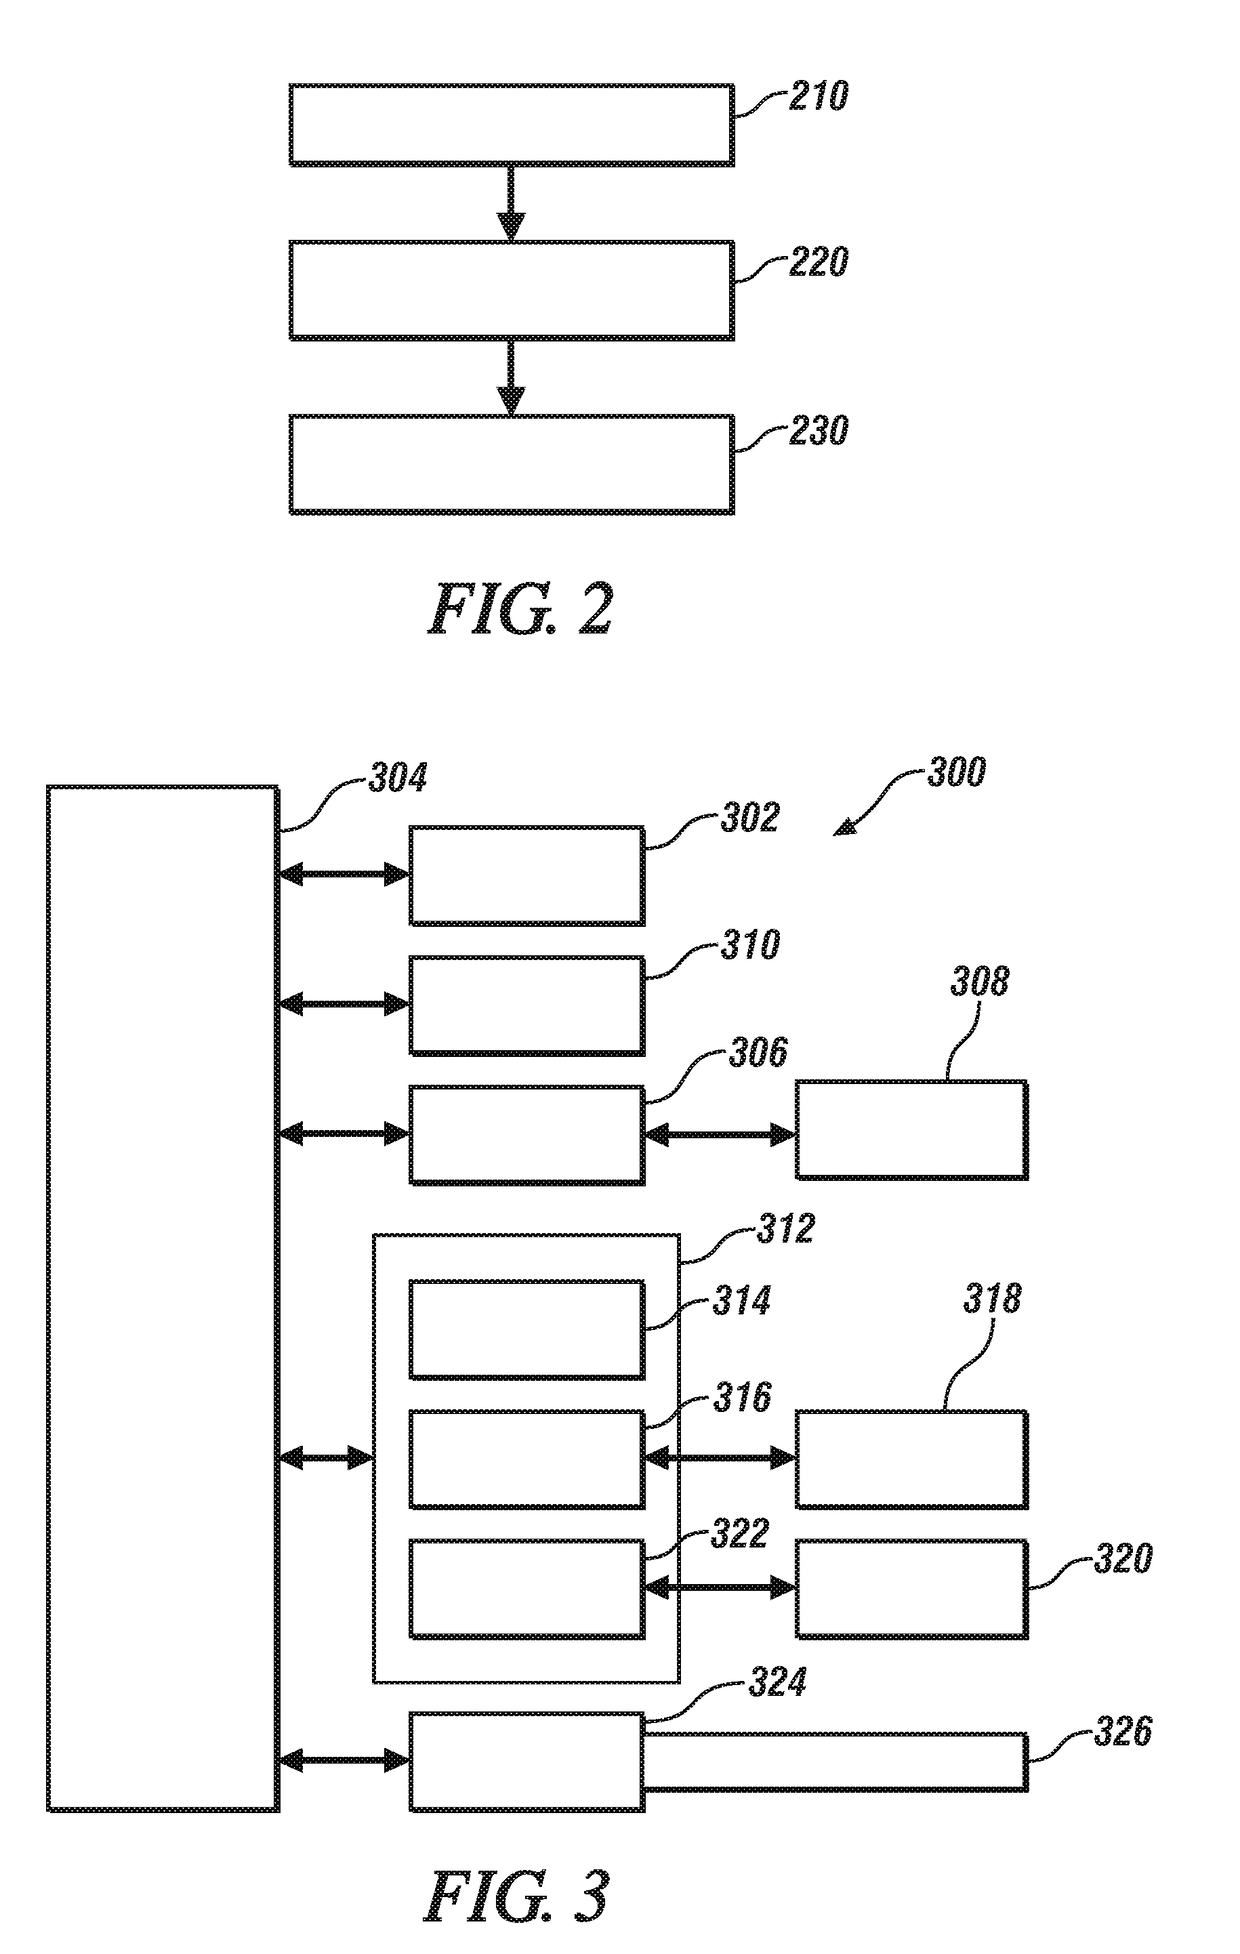 Method and system for generating steering commands to cancel out unwanted steering moments